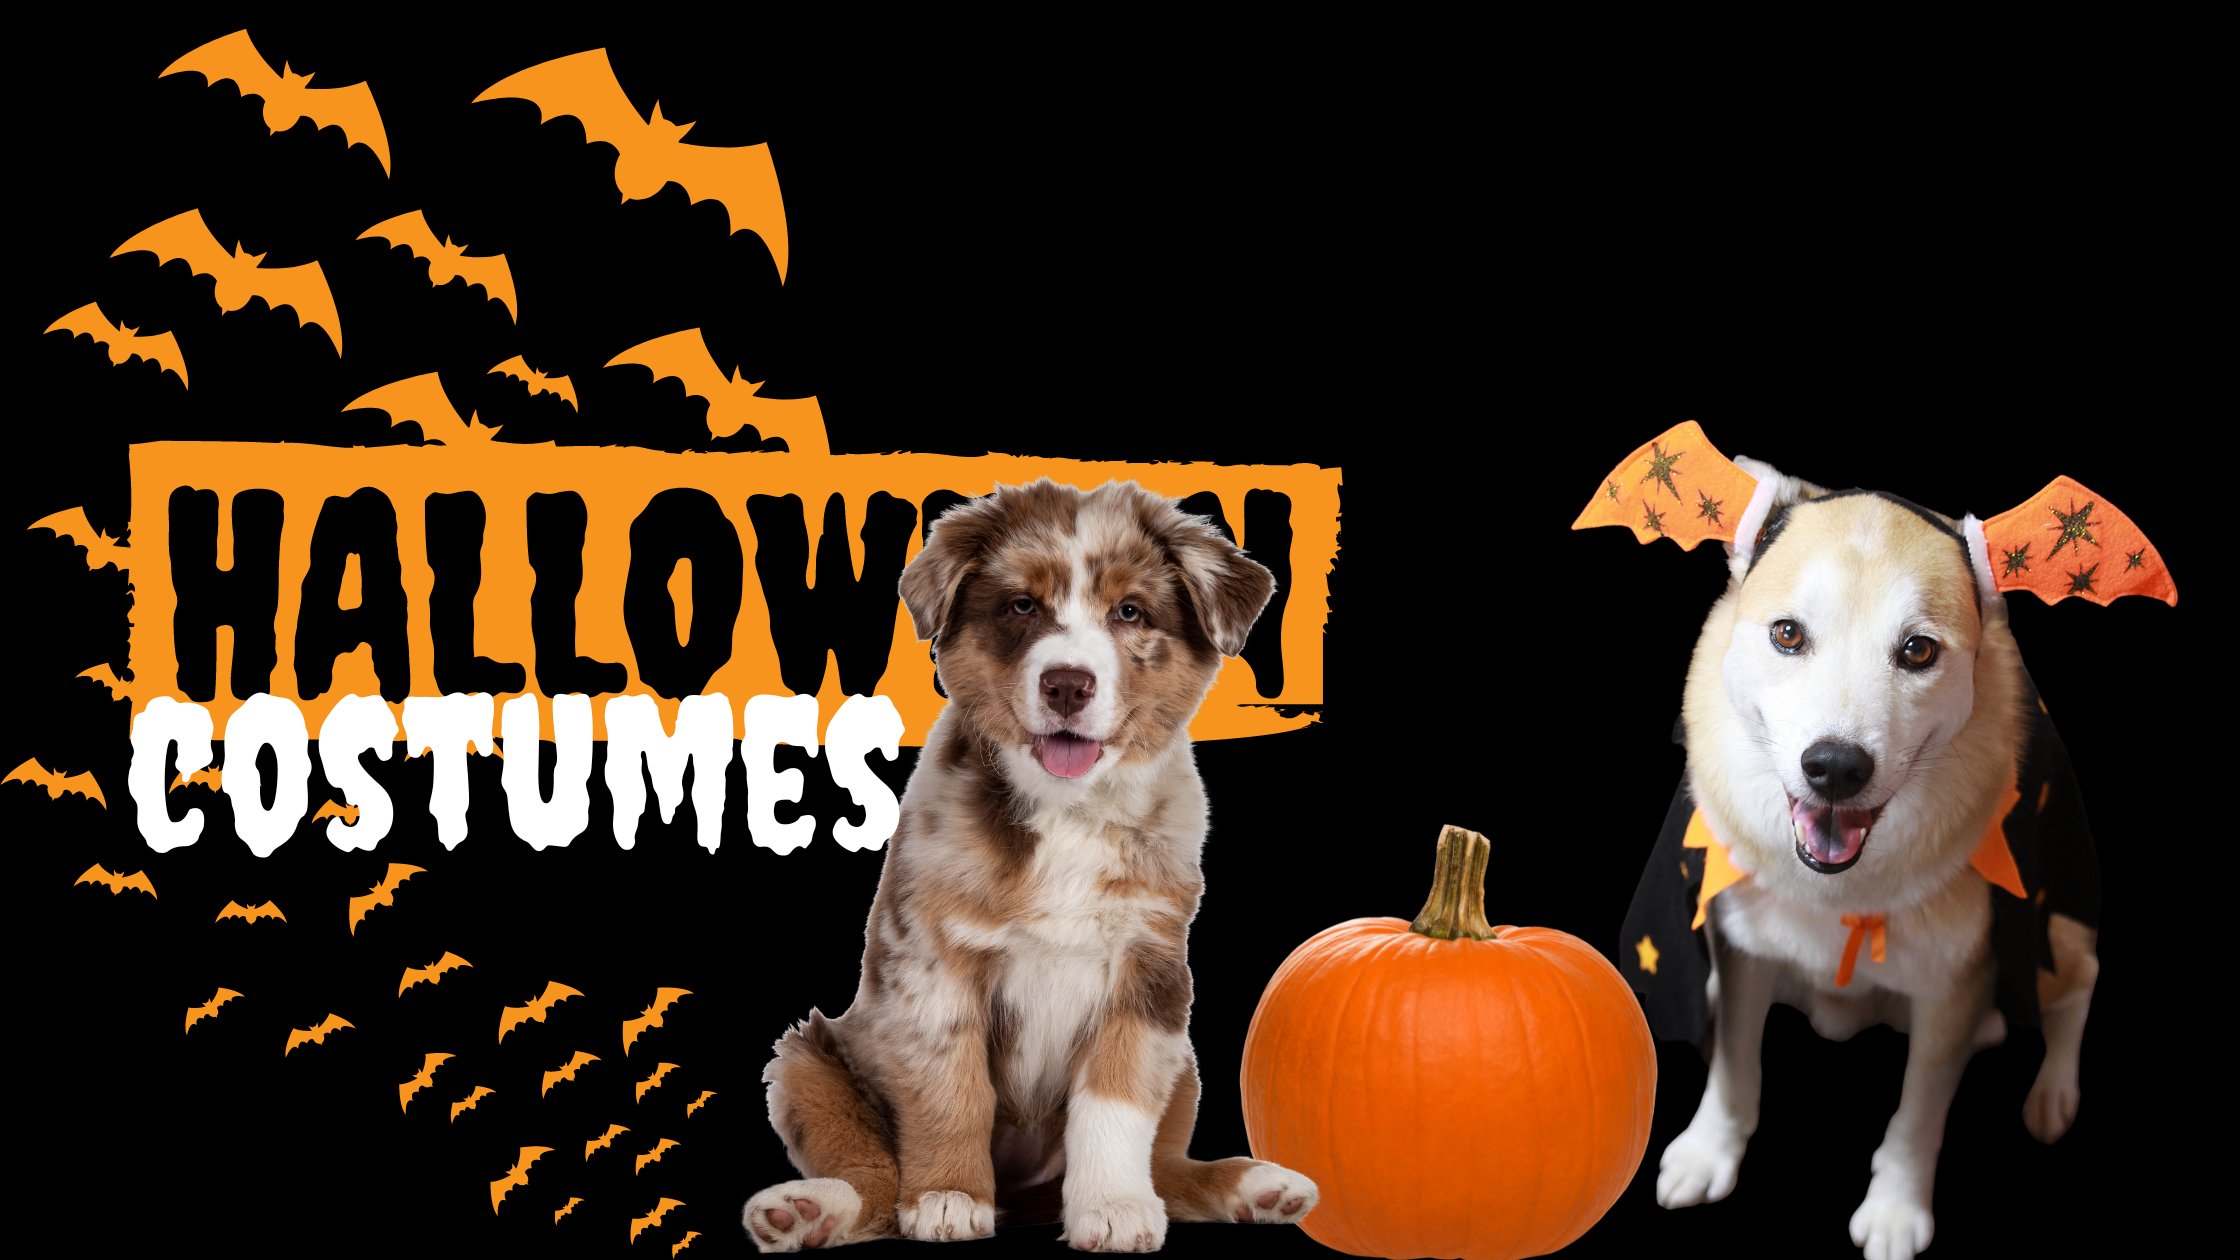 My Furry Best Friend Halloween Costumes for dogs